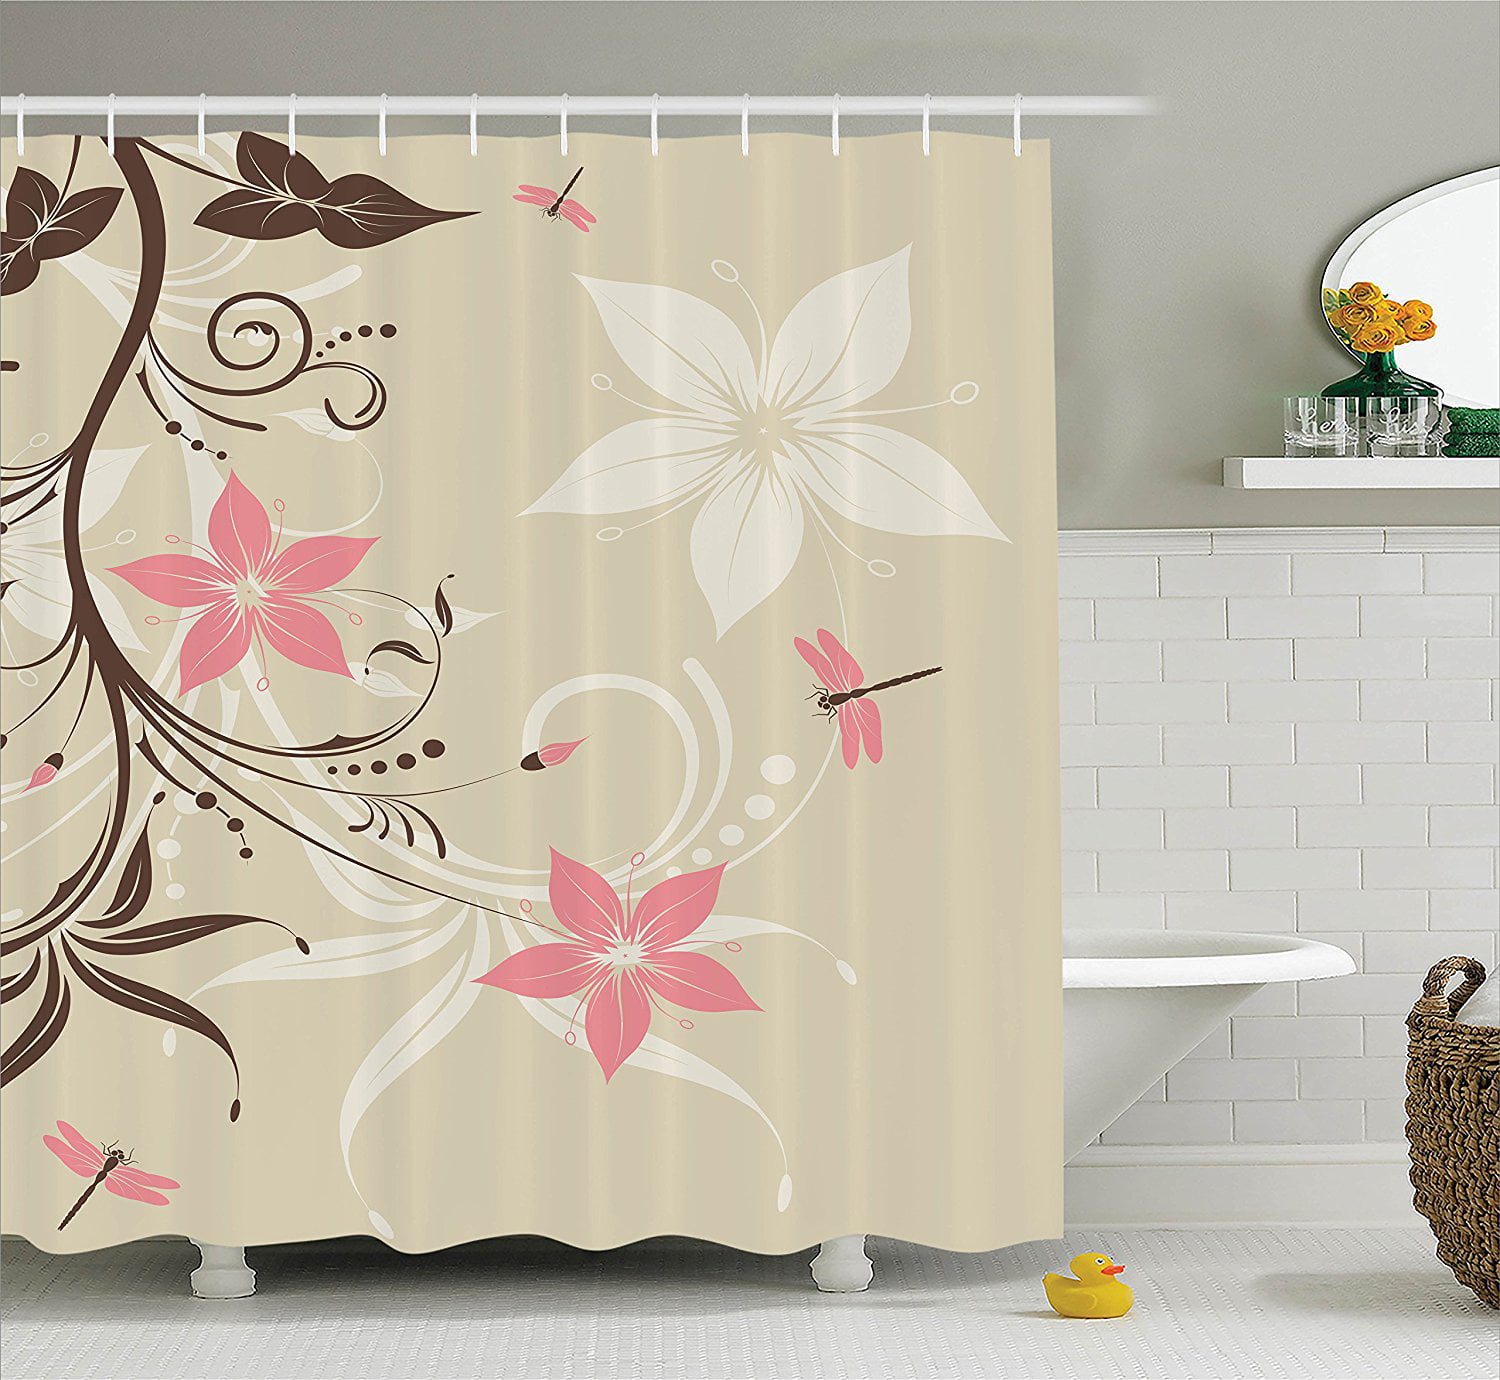 Details about   Abstract Shower Curtain Dragonflies Flowers Print for Bathroom 